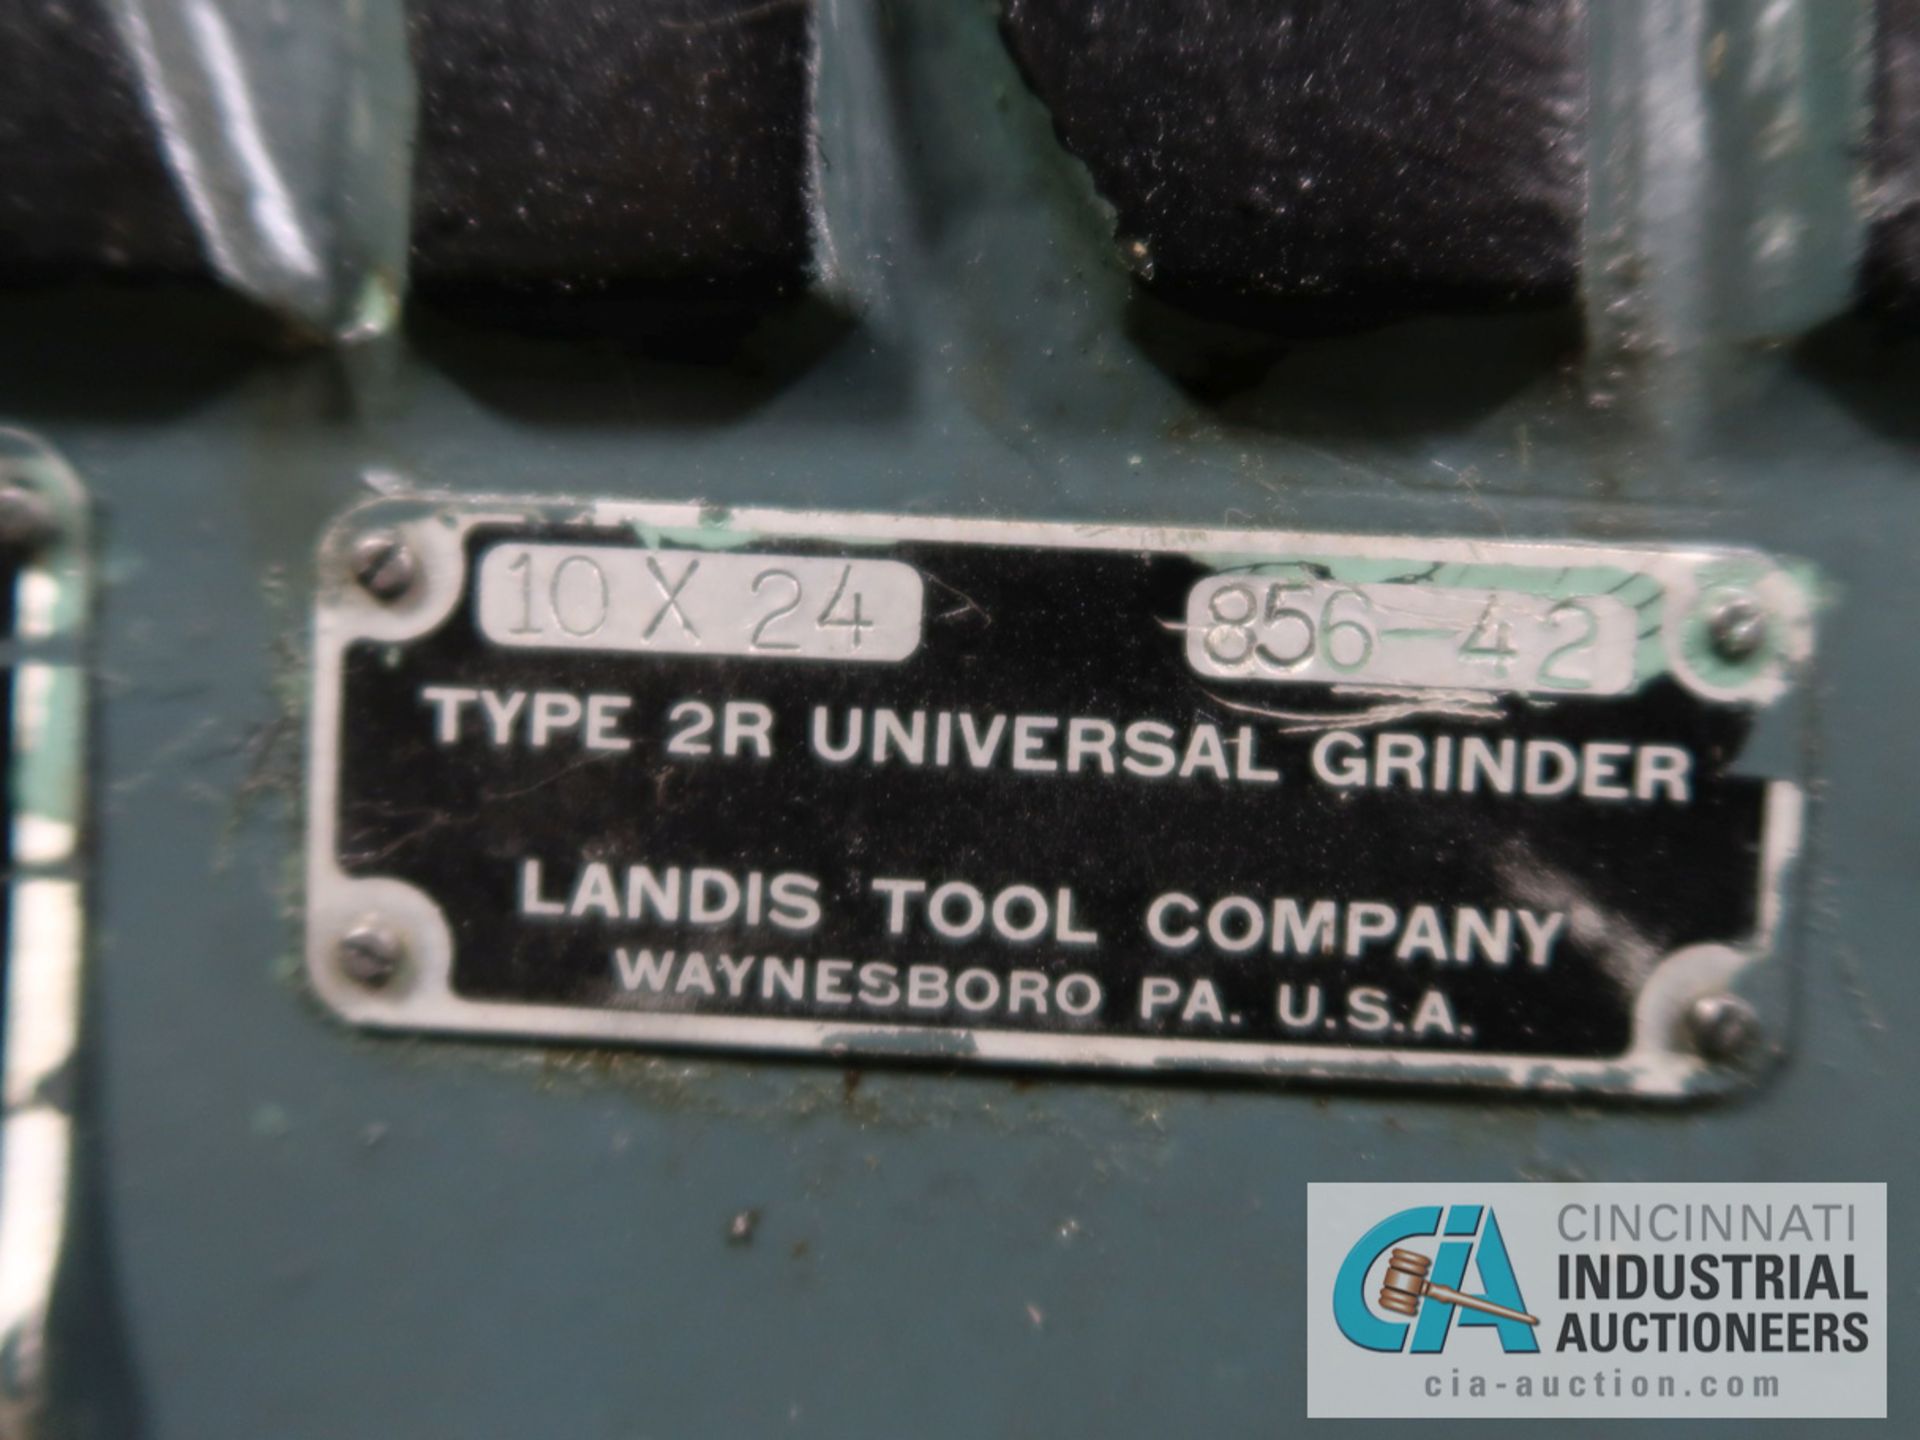 10" X 24" LANDIS TYPE 2R UNIVERSAL O.D. CYLINDRICAL GRINDER; S/N 856-42, DRO - Image 11 of 11